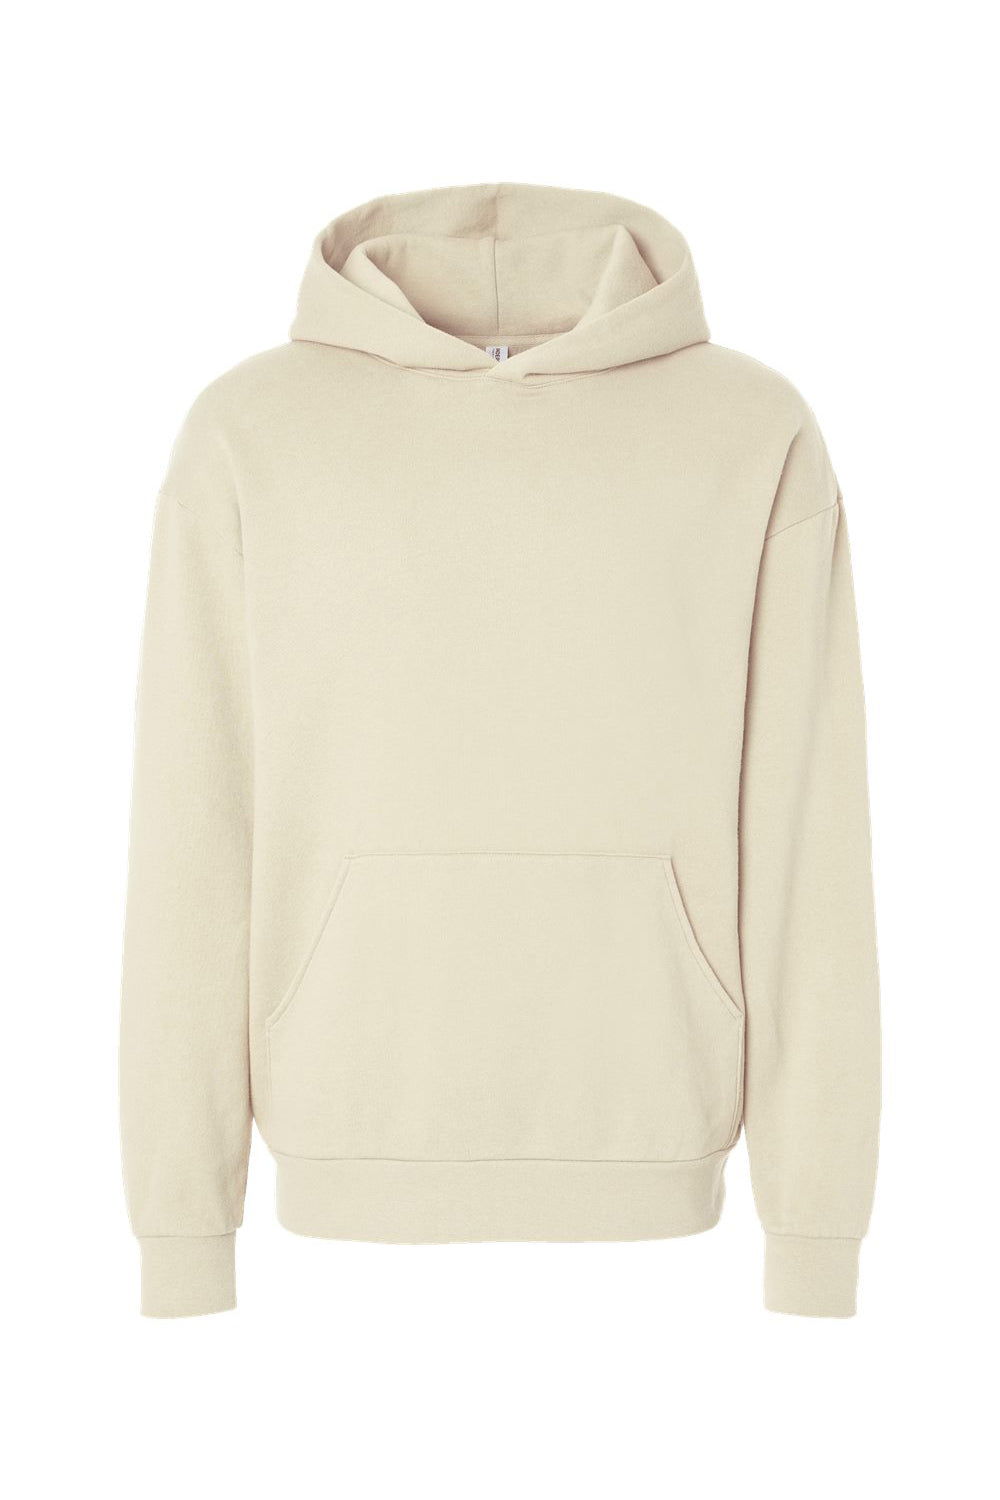 Independent Trading Co. IND280SL Mens Avenue Hooded Sweatshirt Hoodie Ivory Flat Front